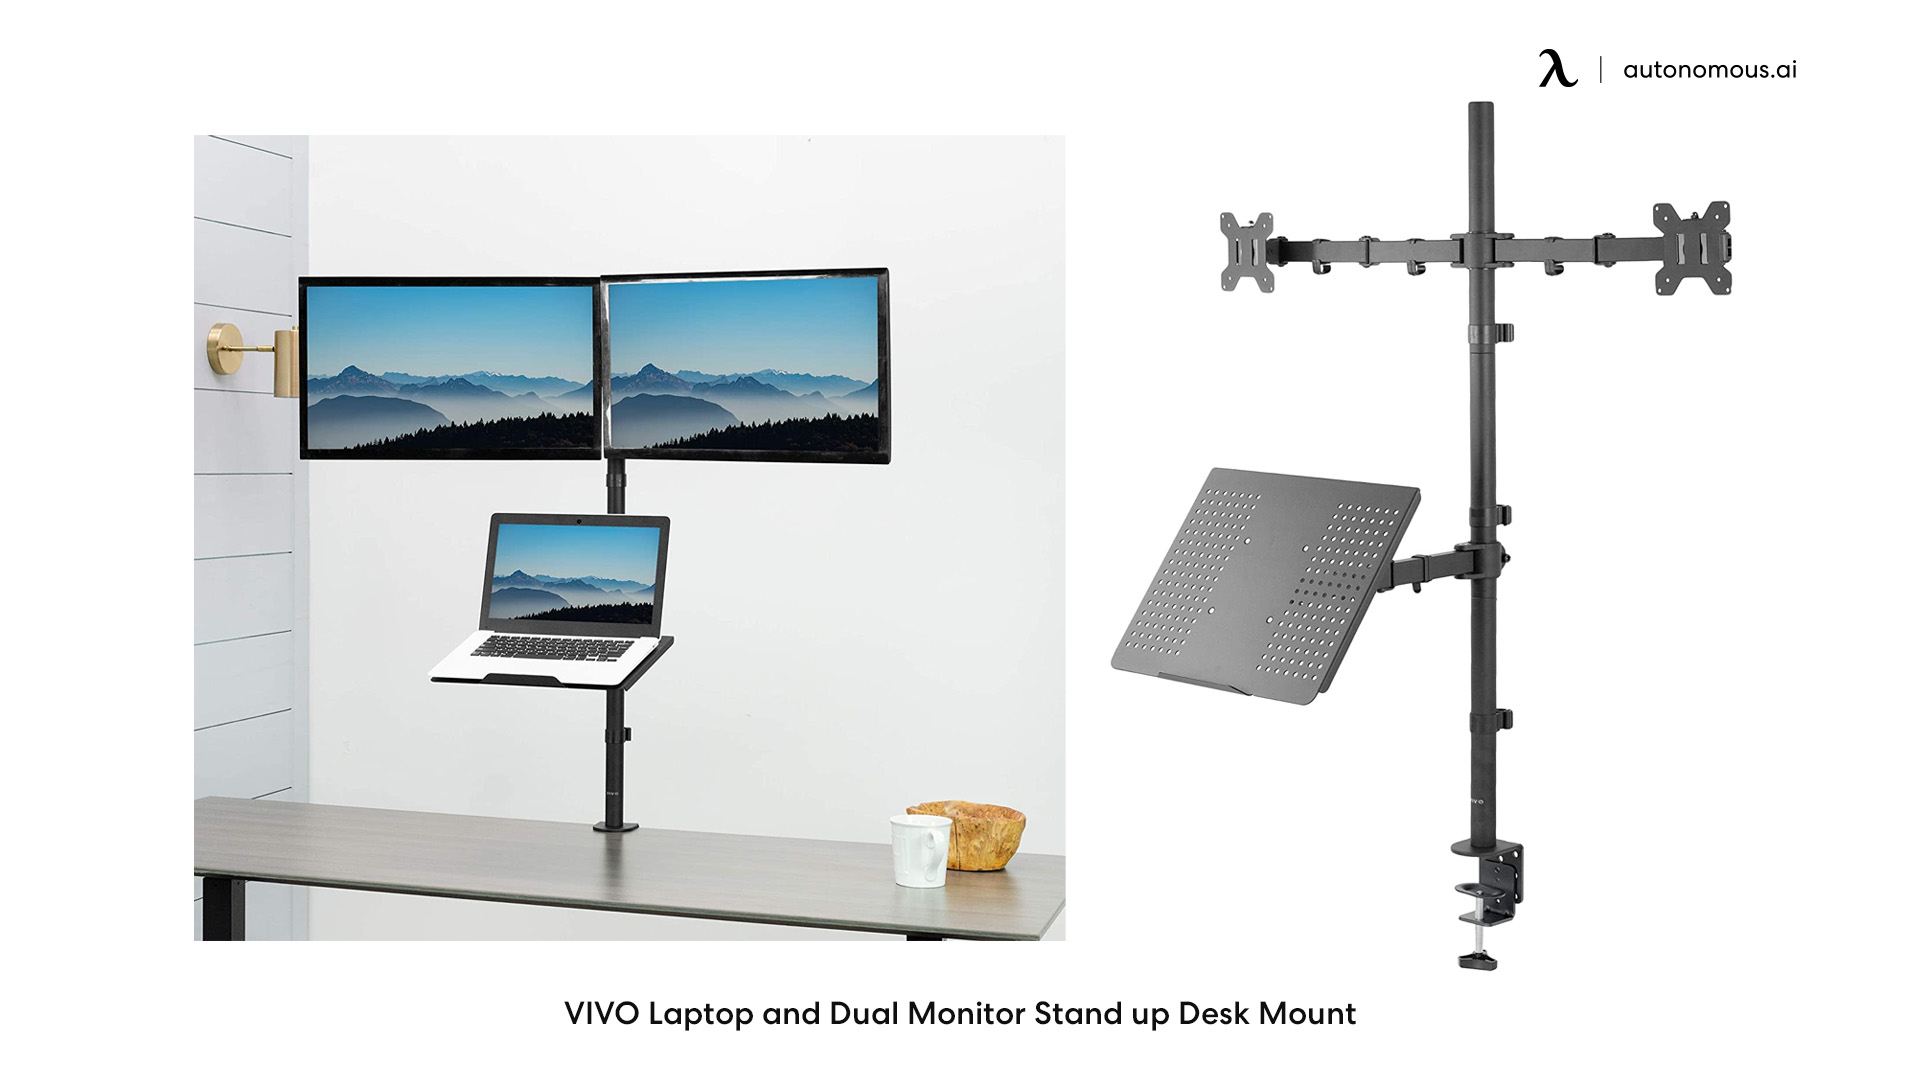 VIVO Laptop and Dual Monitor Stand up Desk Mount